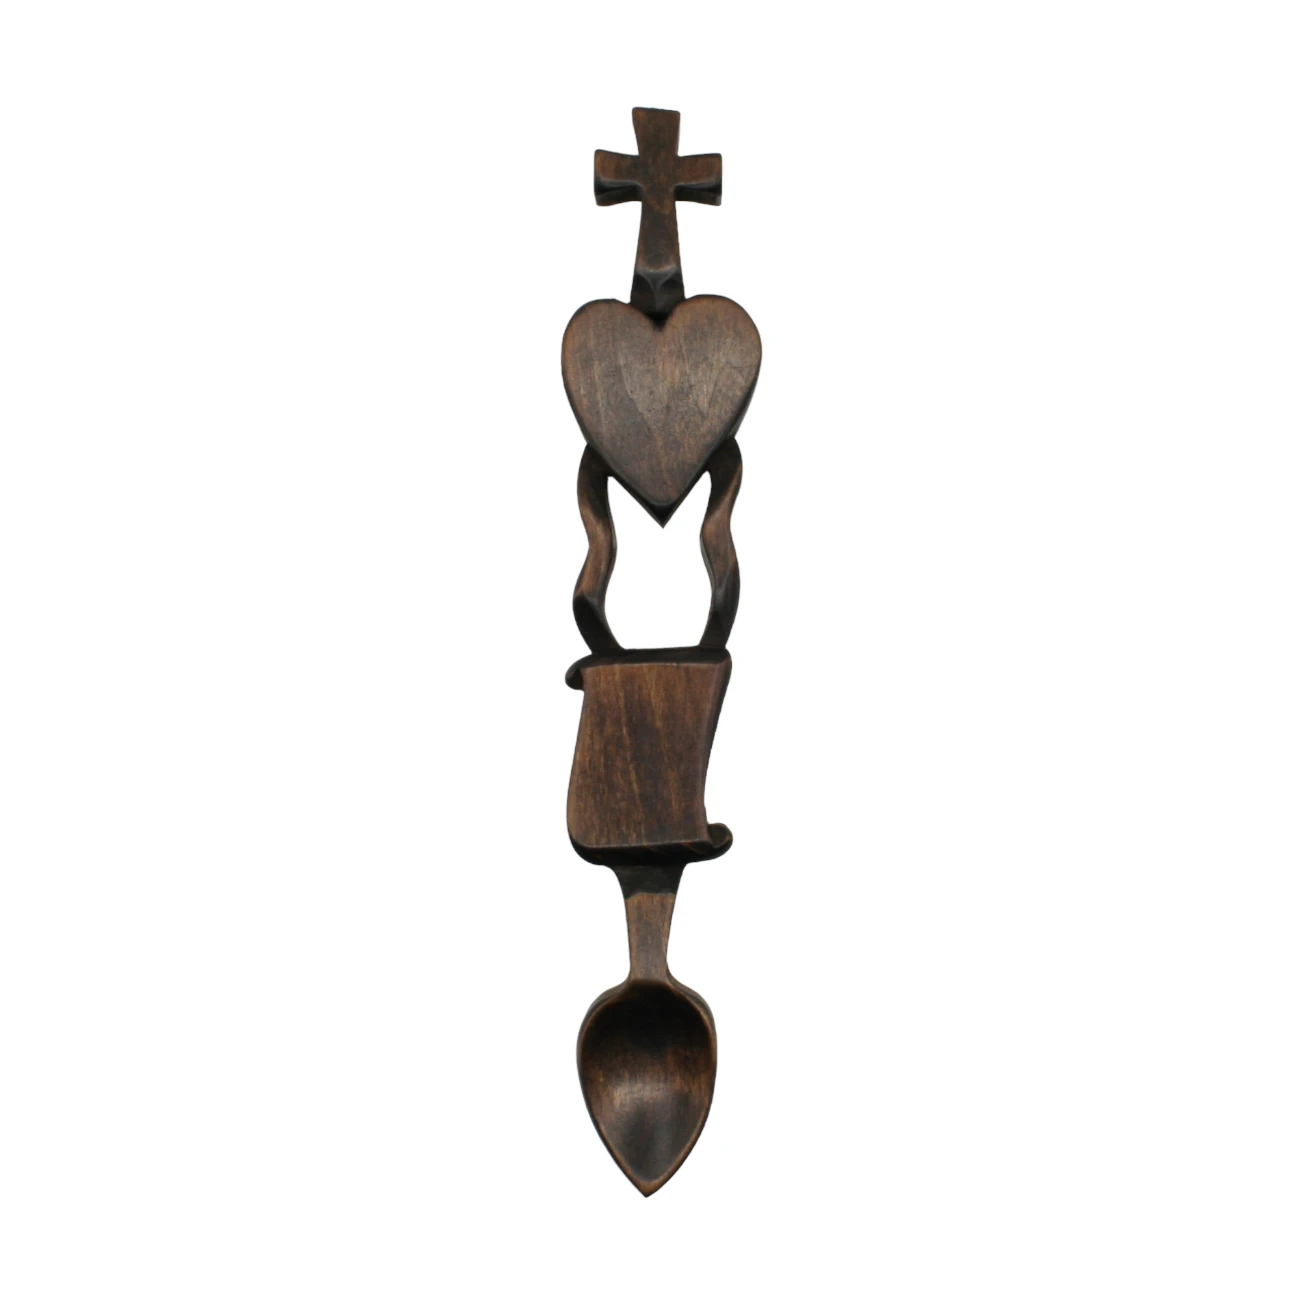 An image of a lovespoon titled Cross, Heart & Scroll